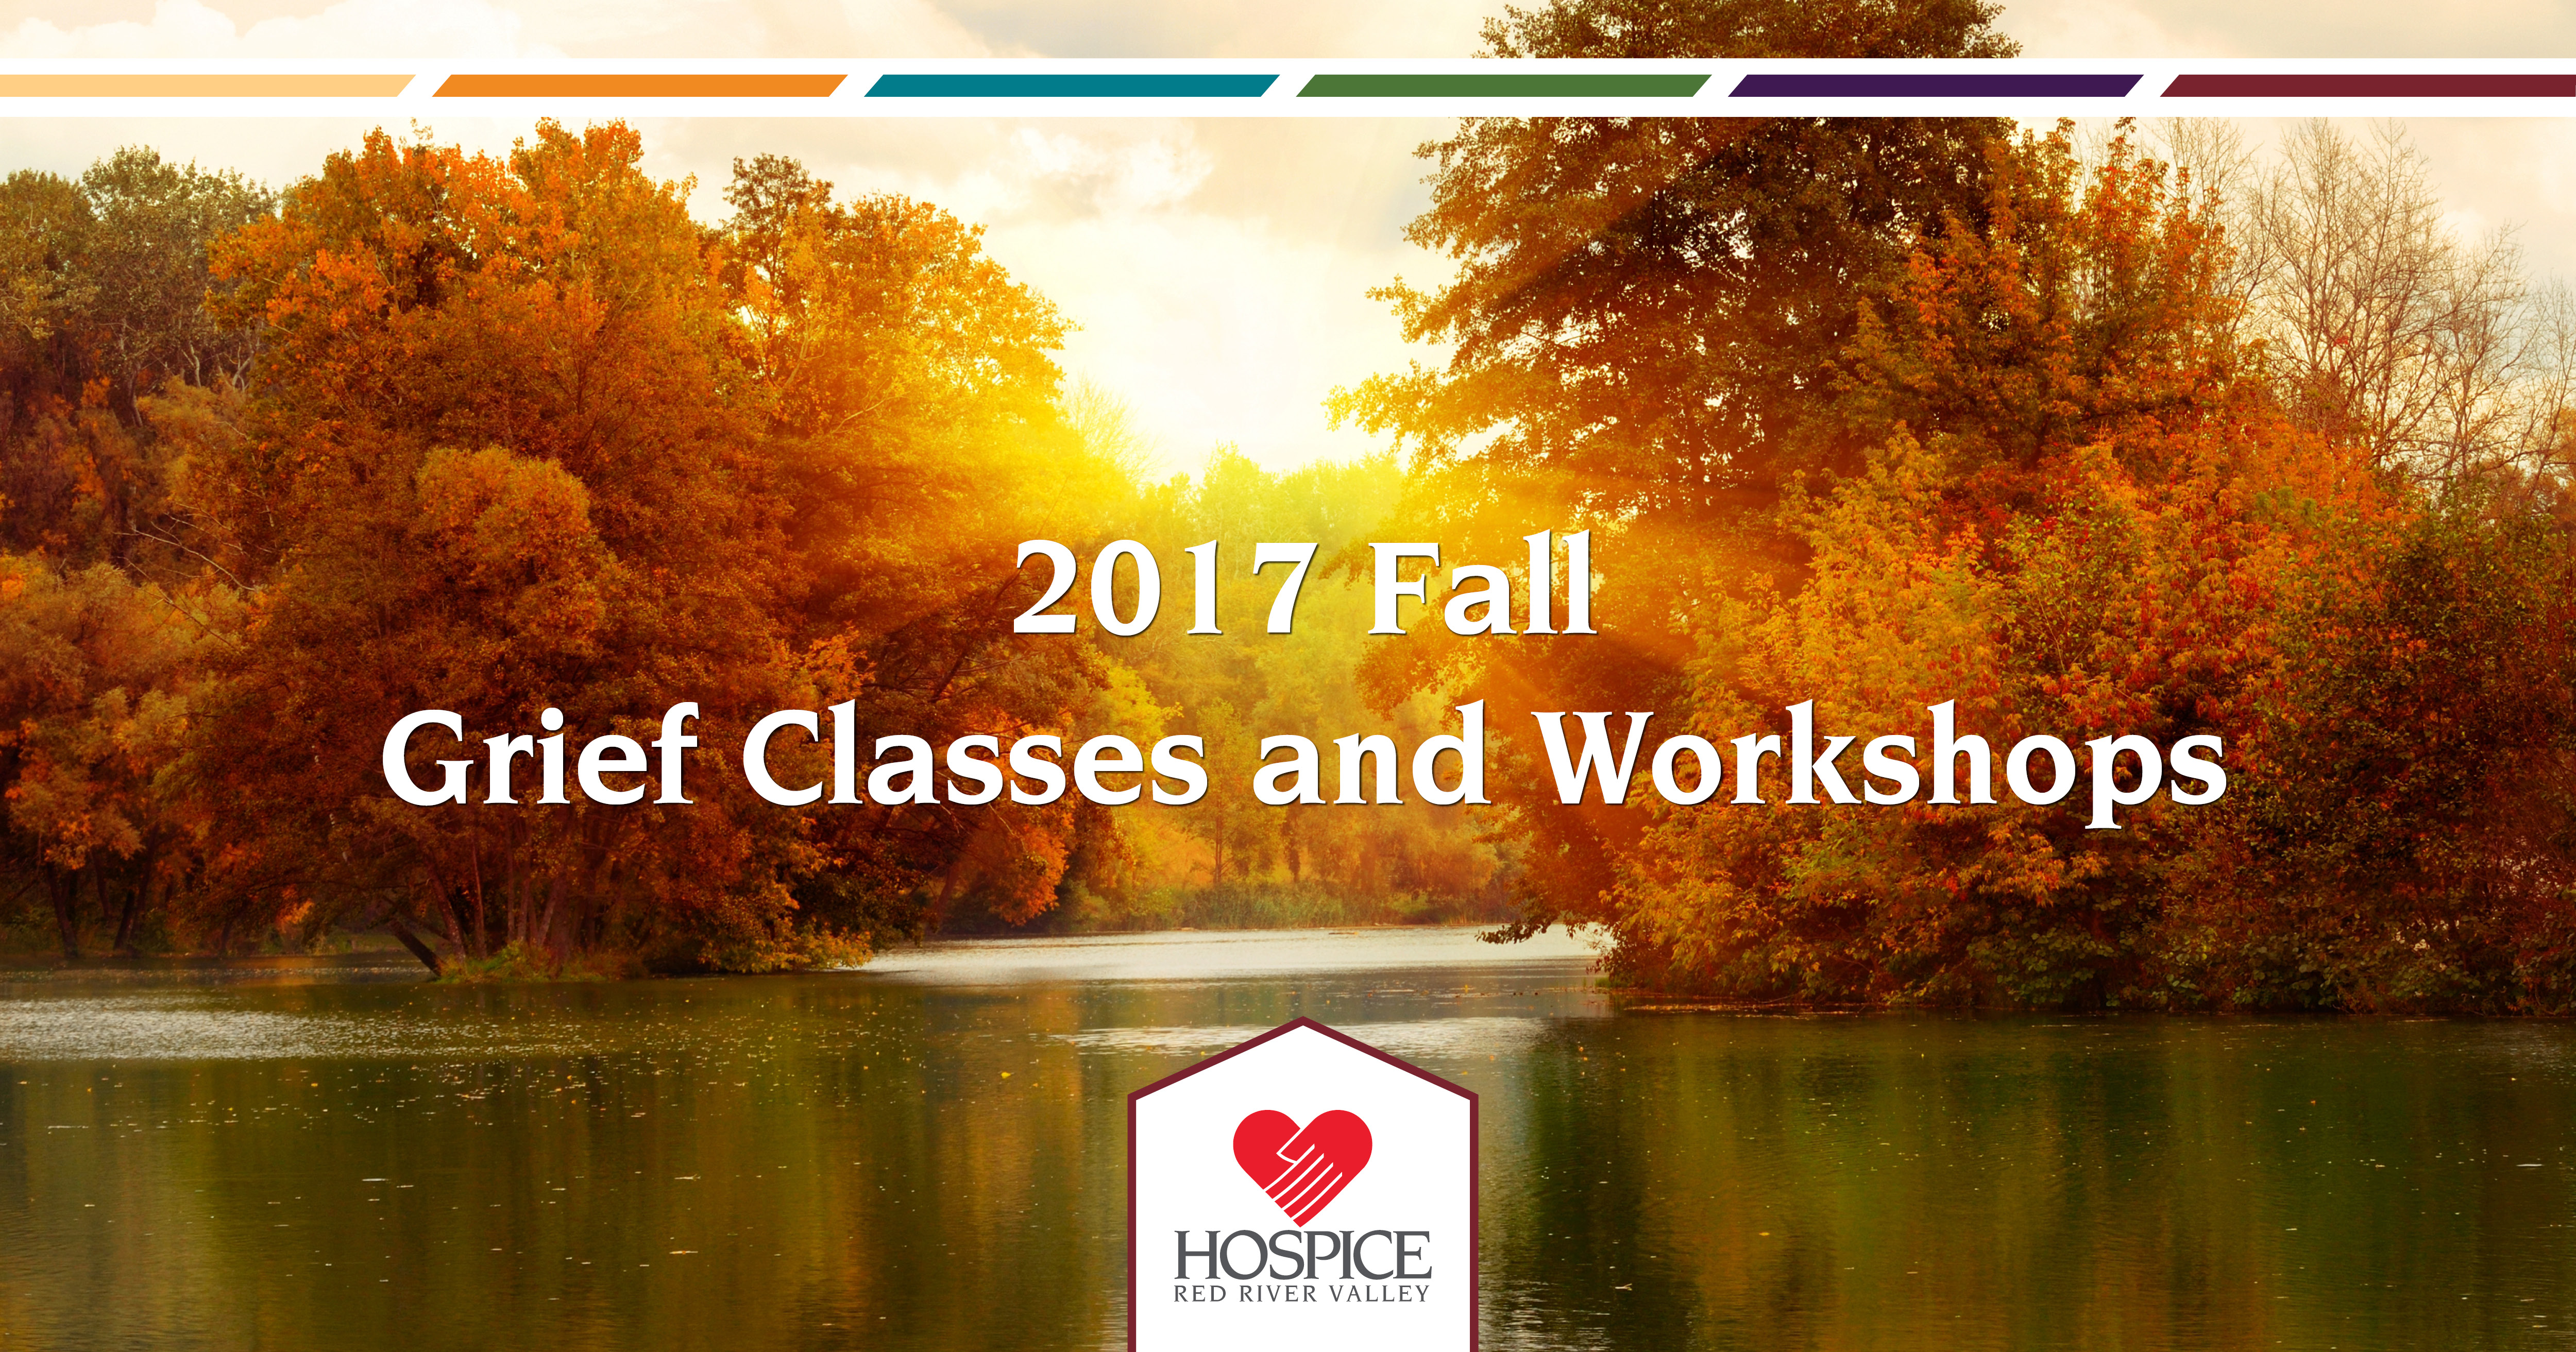 2017 Fall Grief Classes